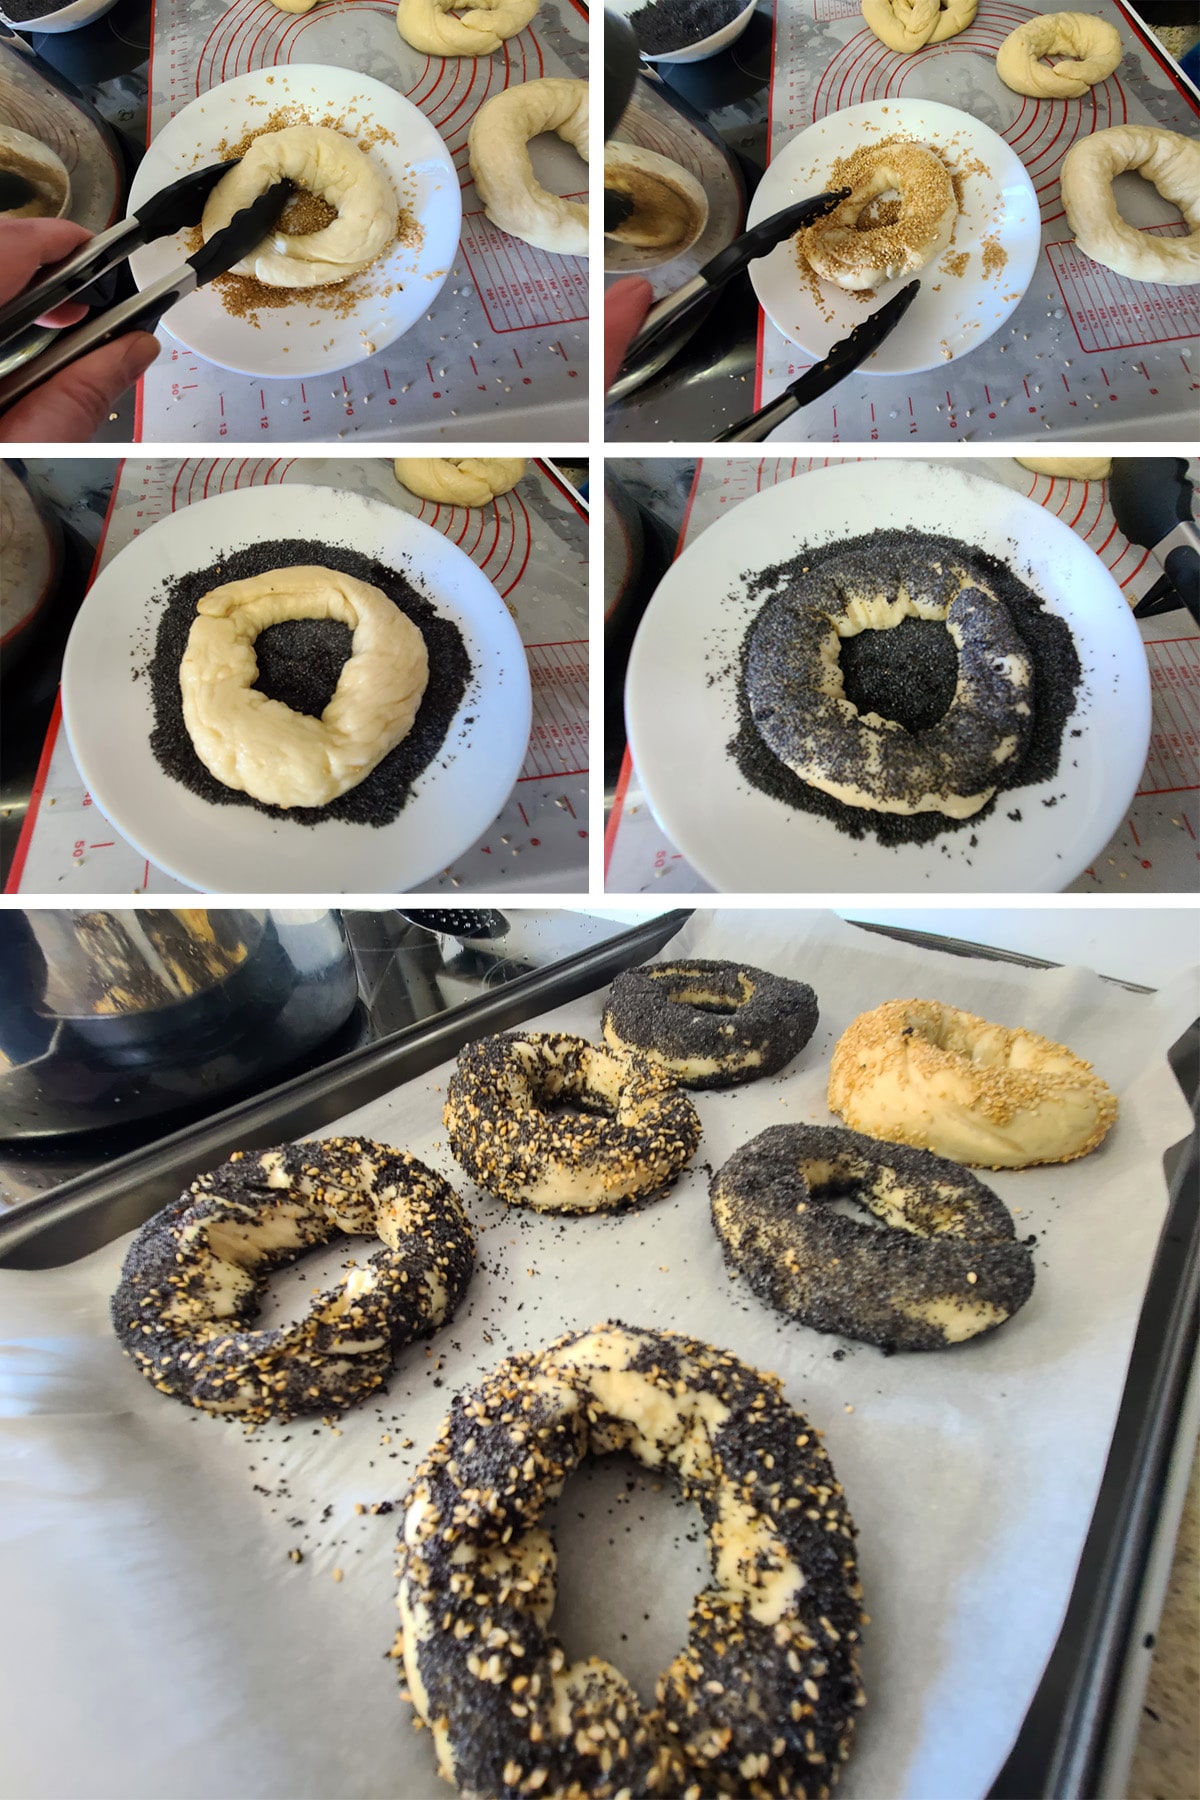 A 5 part image showing the boiled bagels being rolled in shallow bowls of sesame or poppy seeds.